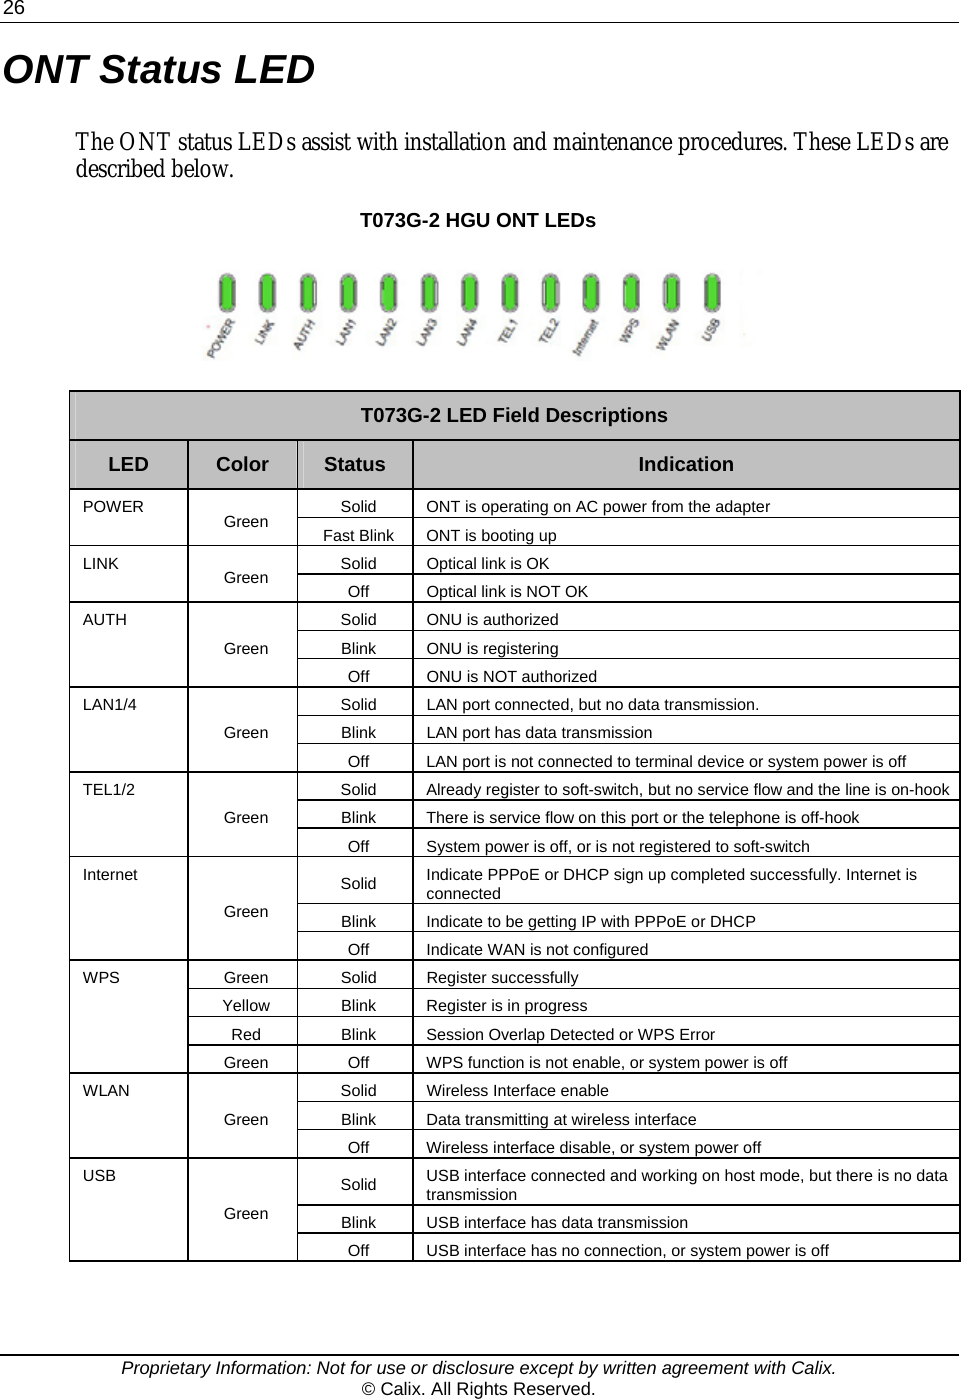 26    Proprietary Information: Not for use or disclosure except by written agreement with Calix. © Calix. All Rights Reserved. ONT Status LED The ONT status LEDs assist with installation and maintenance procedures. These LEDs are described below. T073G-2 HGU ONT LEDs   T073G-2 LED Field Descriptions LED  Color  Status  Indication POWER  Green  Solid  ONT is operating on AC power from the adapter Fast Blink  ONT is booting up LINK  Green  Solid  Optical link is OK Off  Optical link is NOT OK AUTH Green Solid  ONU is authorized Blink  ONU is registering Off  ONU is NOT authorized LAN1/4 Green Solid  LAN port connected, but no data transmission. Blink  LAN port has data transmission Off  LAN port is not connected to terminal device or system power is off TEL1/2 Green Solid  Already register to soft-switch, but no service flow and the line is on-hookBlink  There is service flow on this port or the telephone is off-hook Off  System power is off, or is not registered to soft-switch Internet Green Solid  Indicate PPPoE or DHCP sign up completed successfully. Internet is connected Blink  Indicate to be getting IP with PPPoE or DHCP Off  Indicate WAN is not configured WPS Green Solid Register successfully Yellow  Blink  Register is in progress Red  Blink  Session Overlap Detected or WPS Error Green  Off  WPS function is not enable, or system power is off WLAN Green Solid  Wireless Interface enable Blink  Data transmitting at wireless interface Off  Wireless interface disable, or system power off USB Green Solid  USB interface connected and working on host mode, but there is no data transmission Blink  USB interface has data transmission Off  USB interface has no connection, or system power is off  